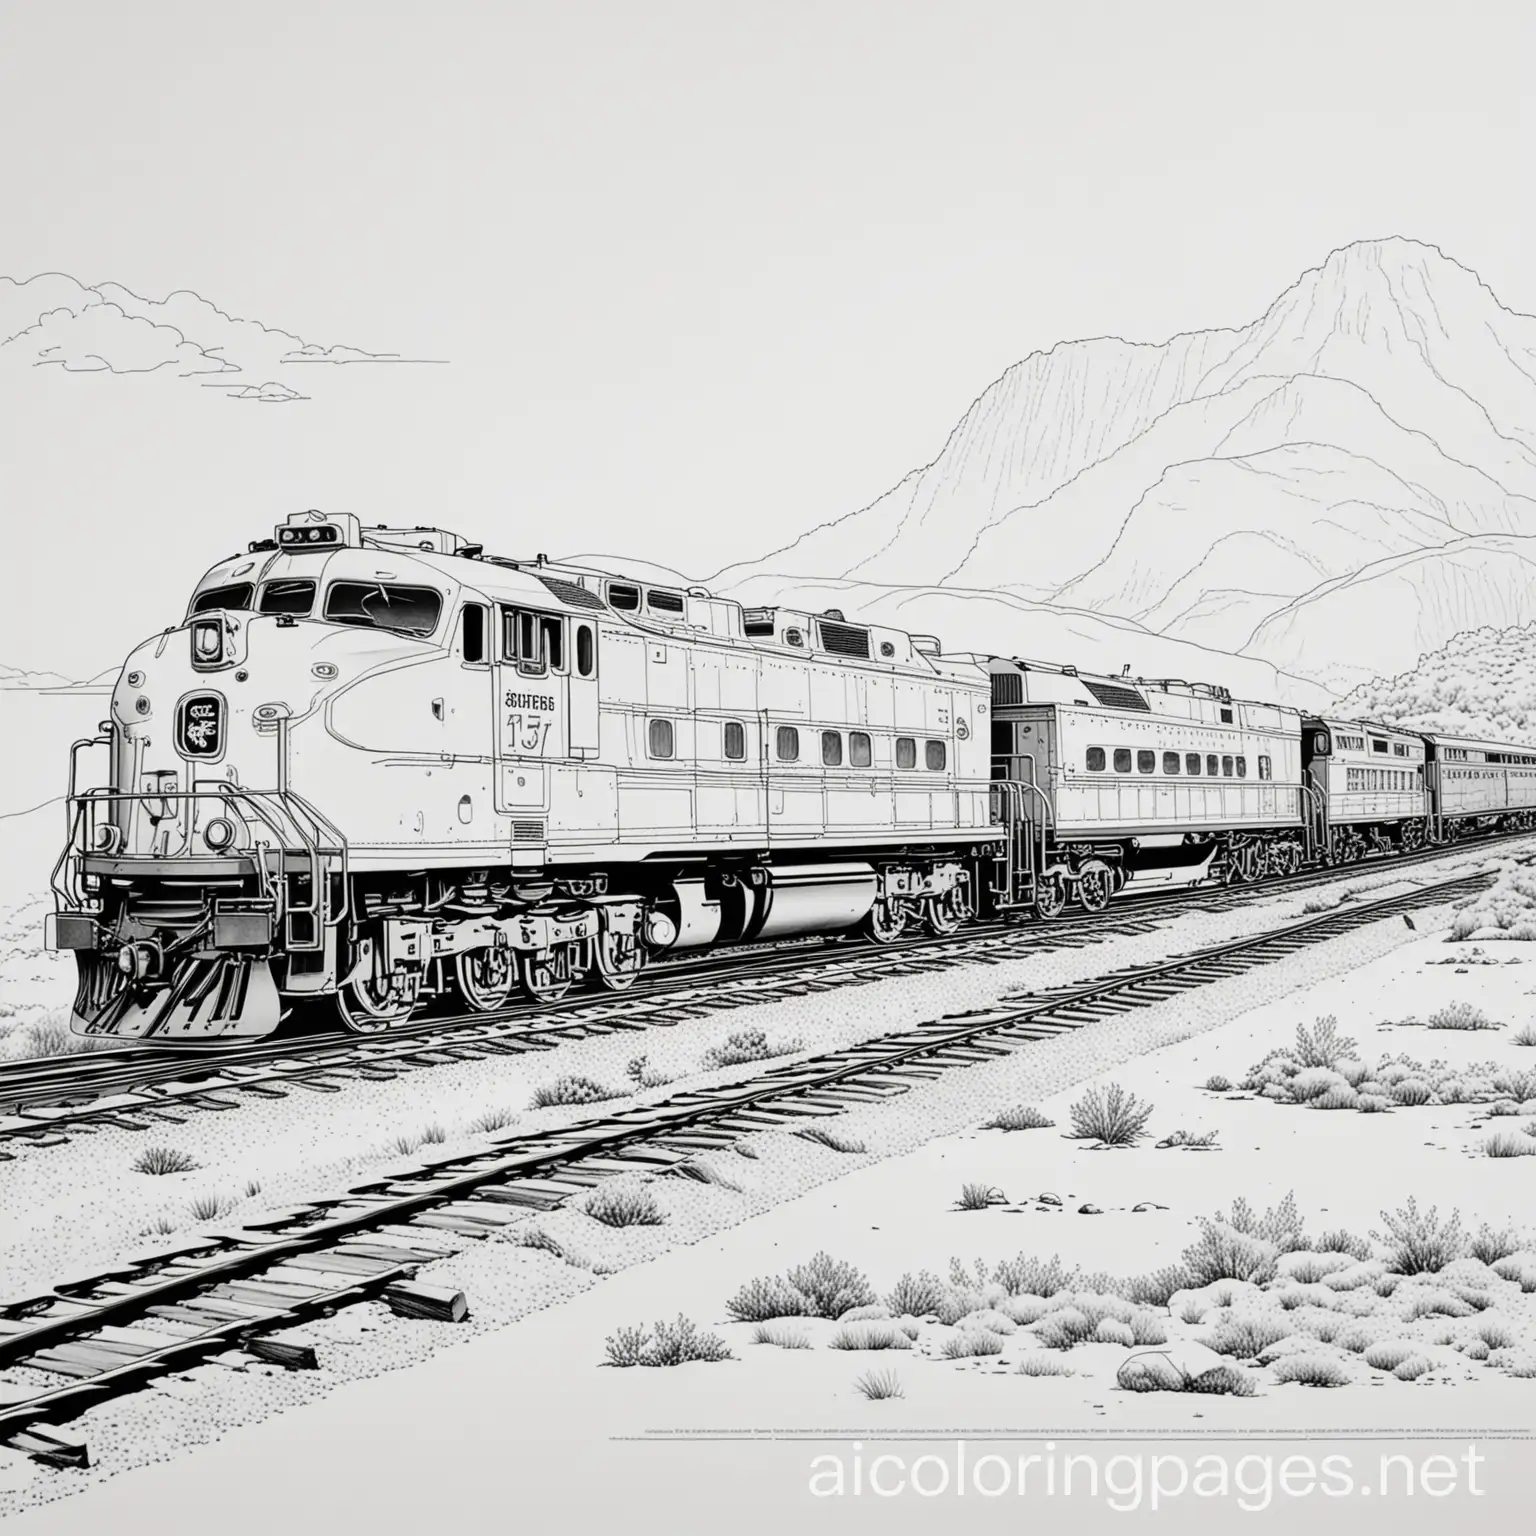 Simple-Southern-Pacific-Train-Coloring-Page-for-Kids